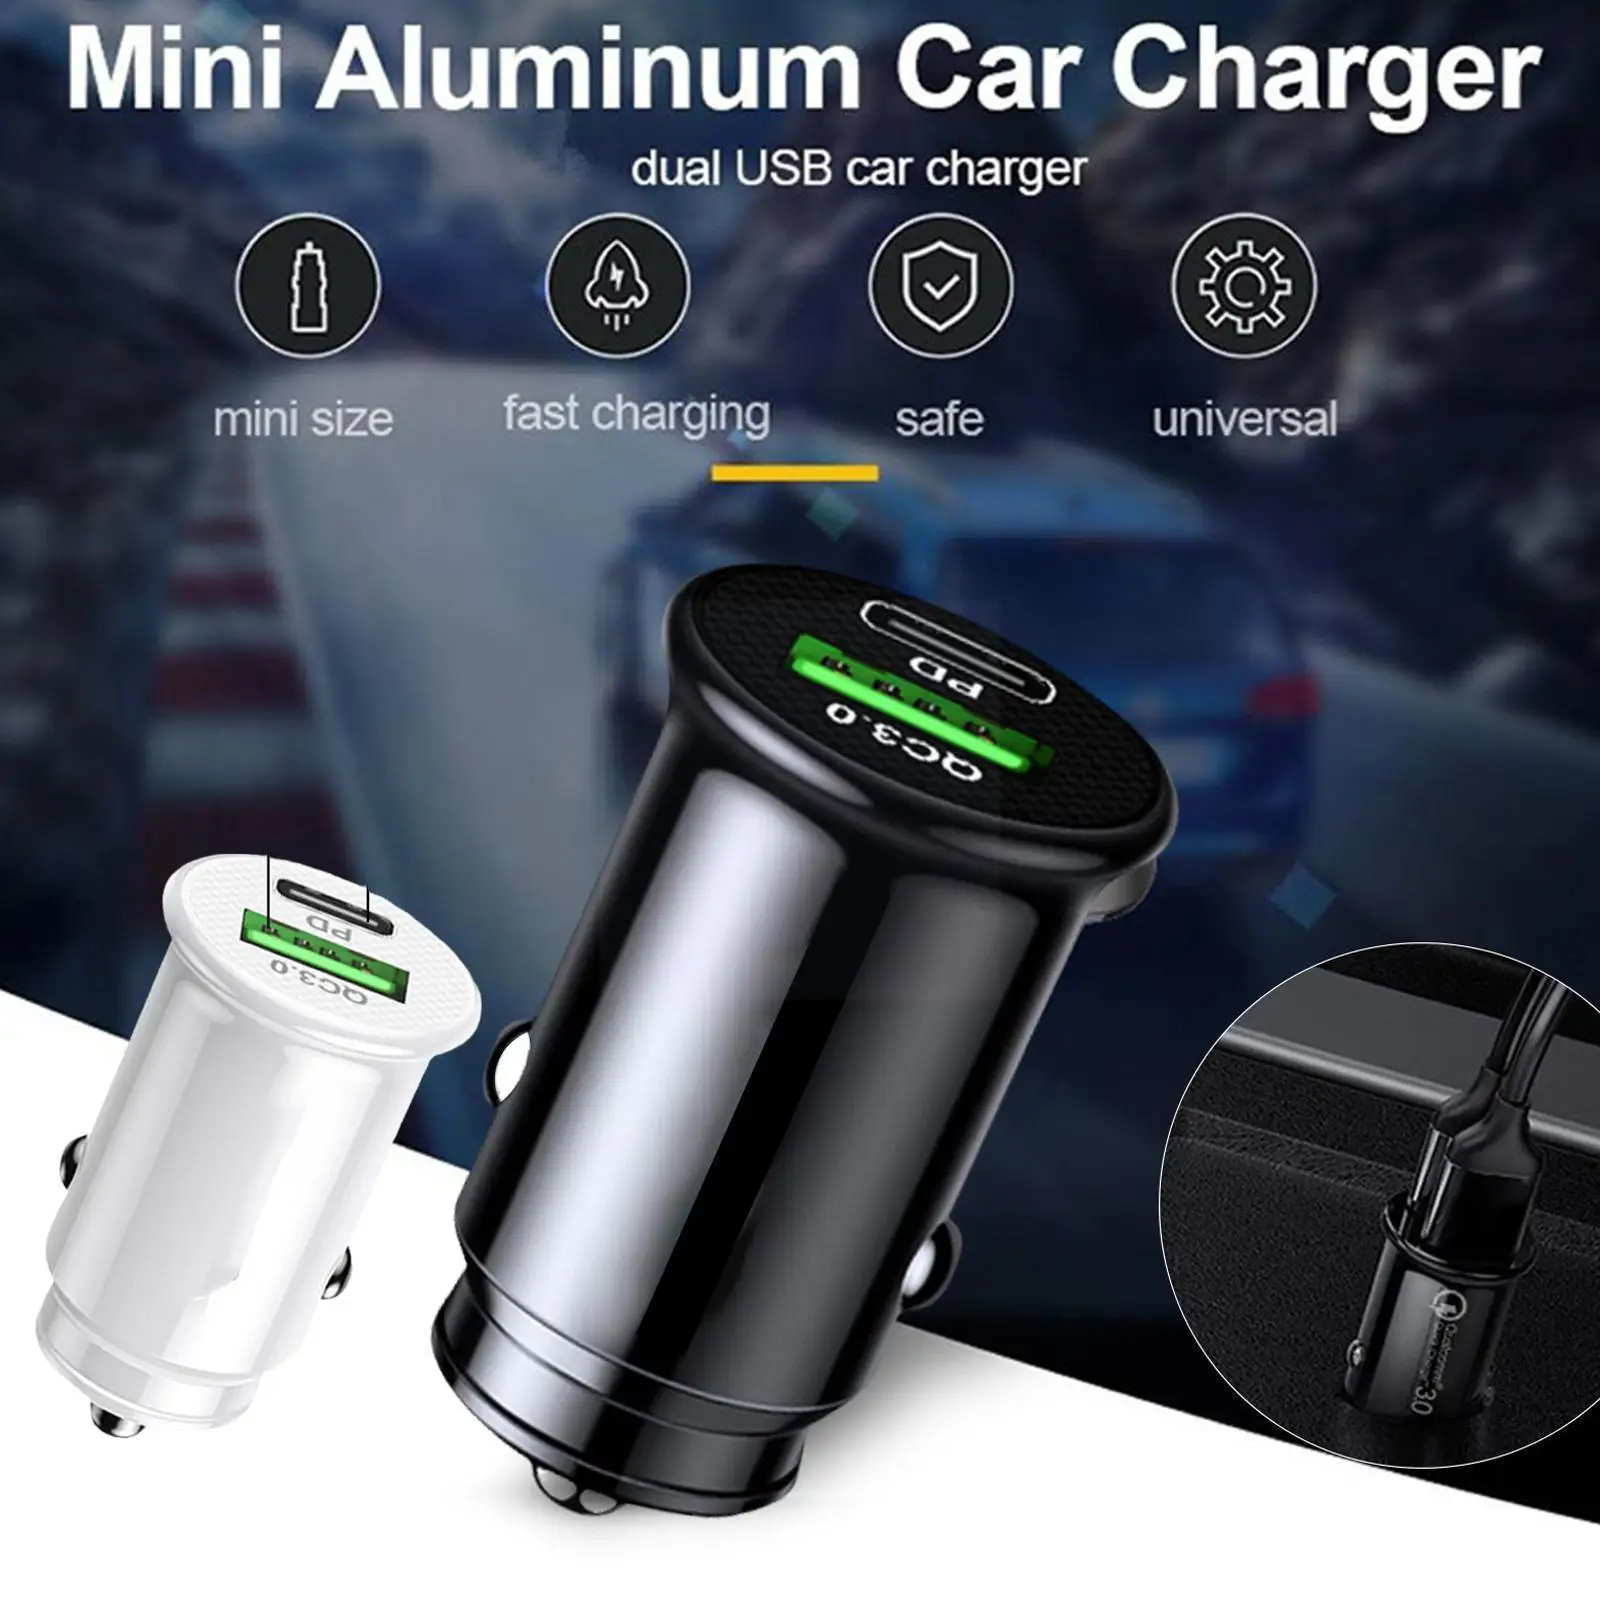 USB Car Charger Quick Charge 48W QC 3.0 PD 20W Super Fast Charging Dual USB Smart Interface For Smart Phone Car Charger V9E7